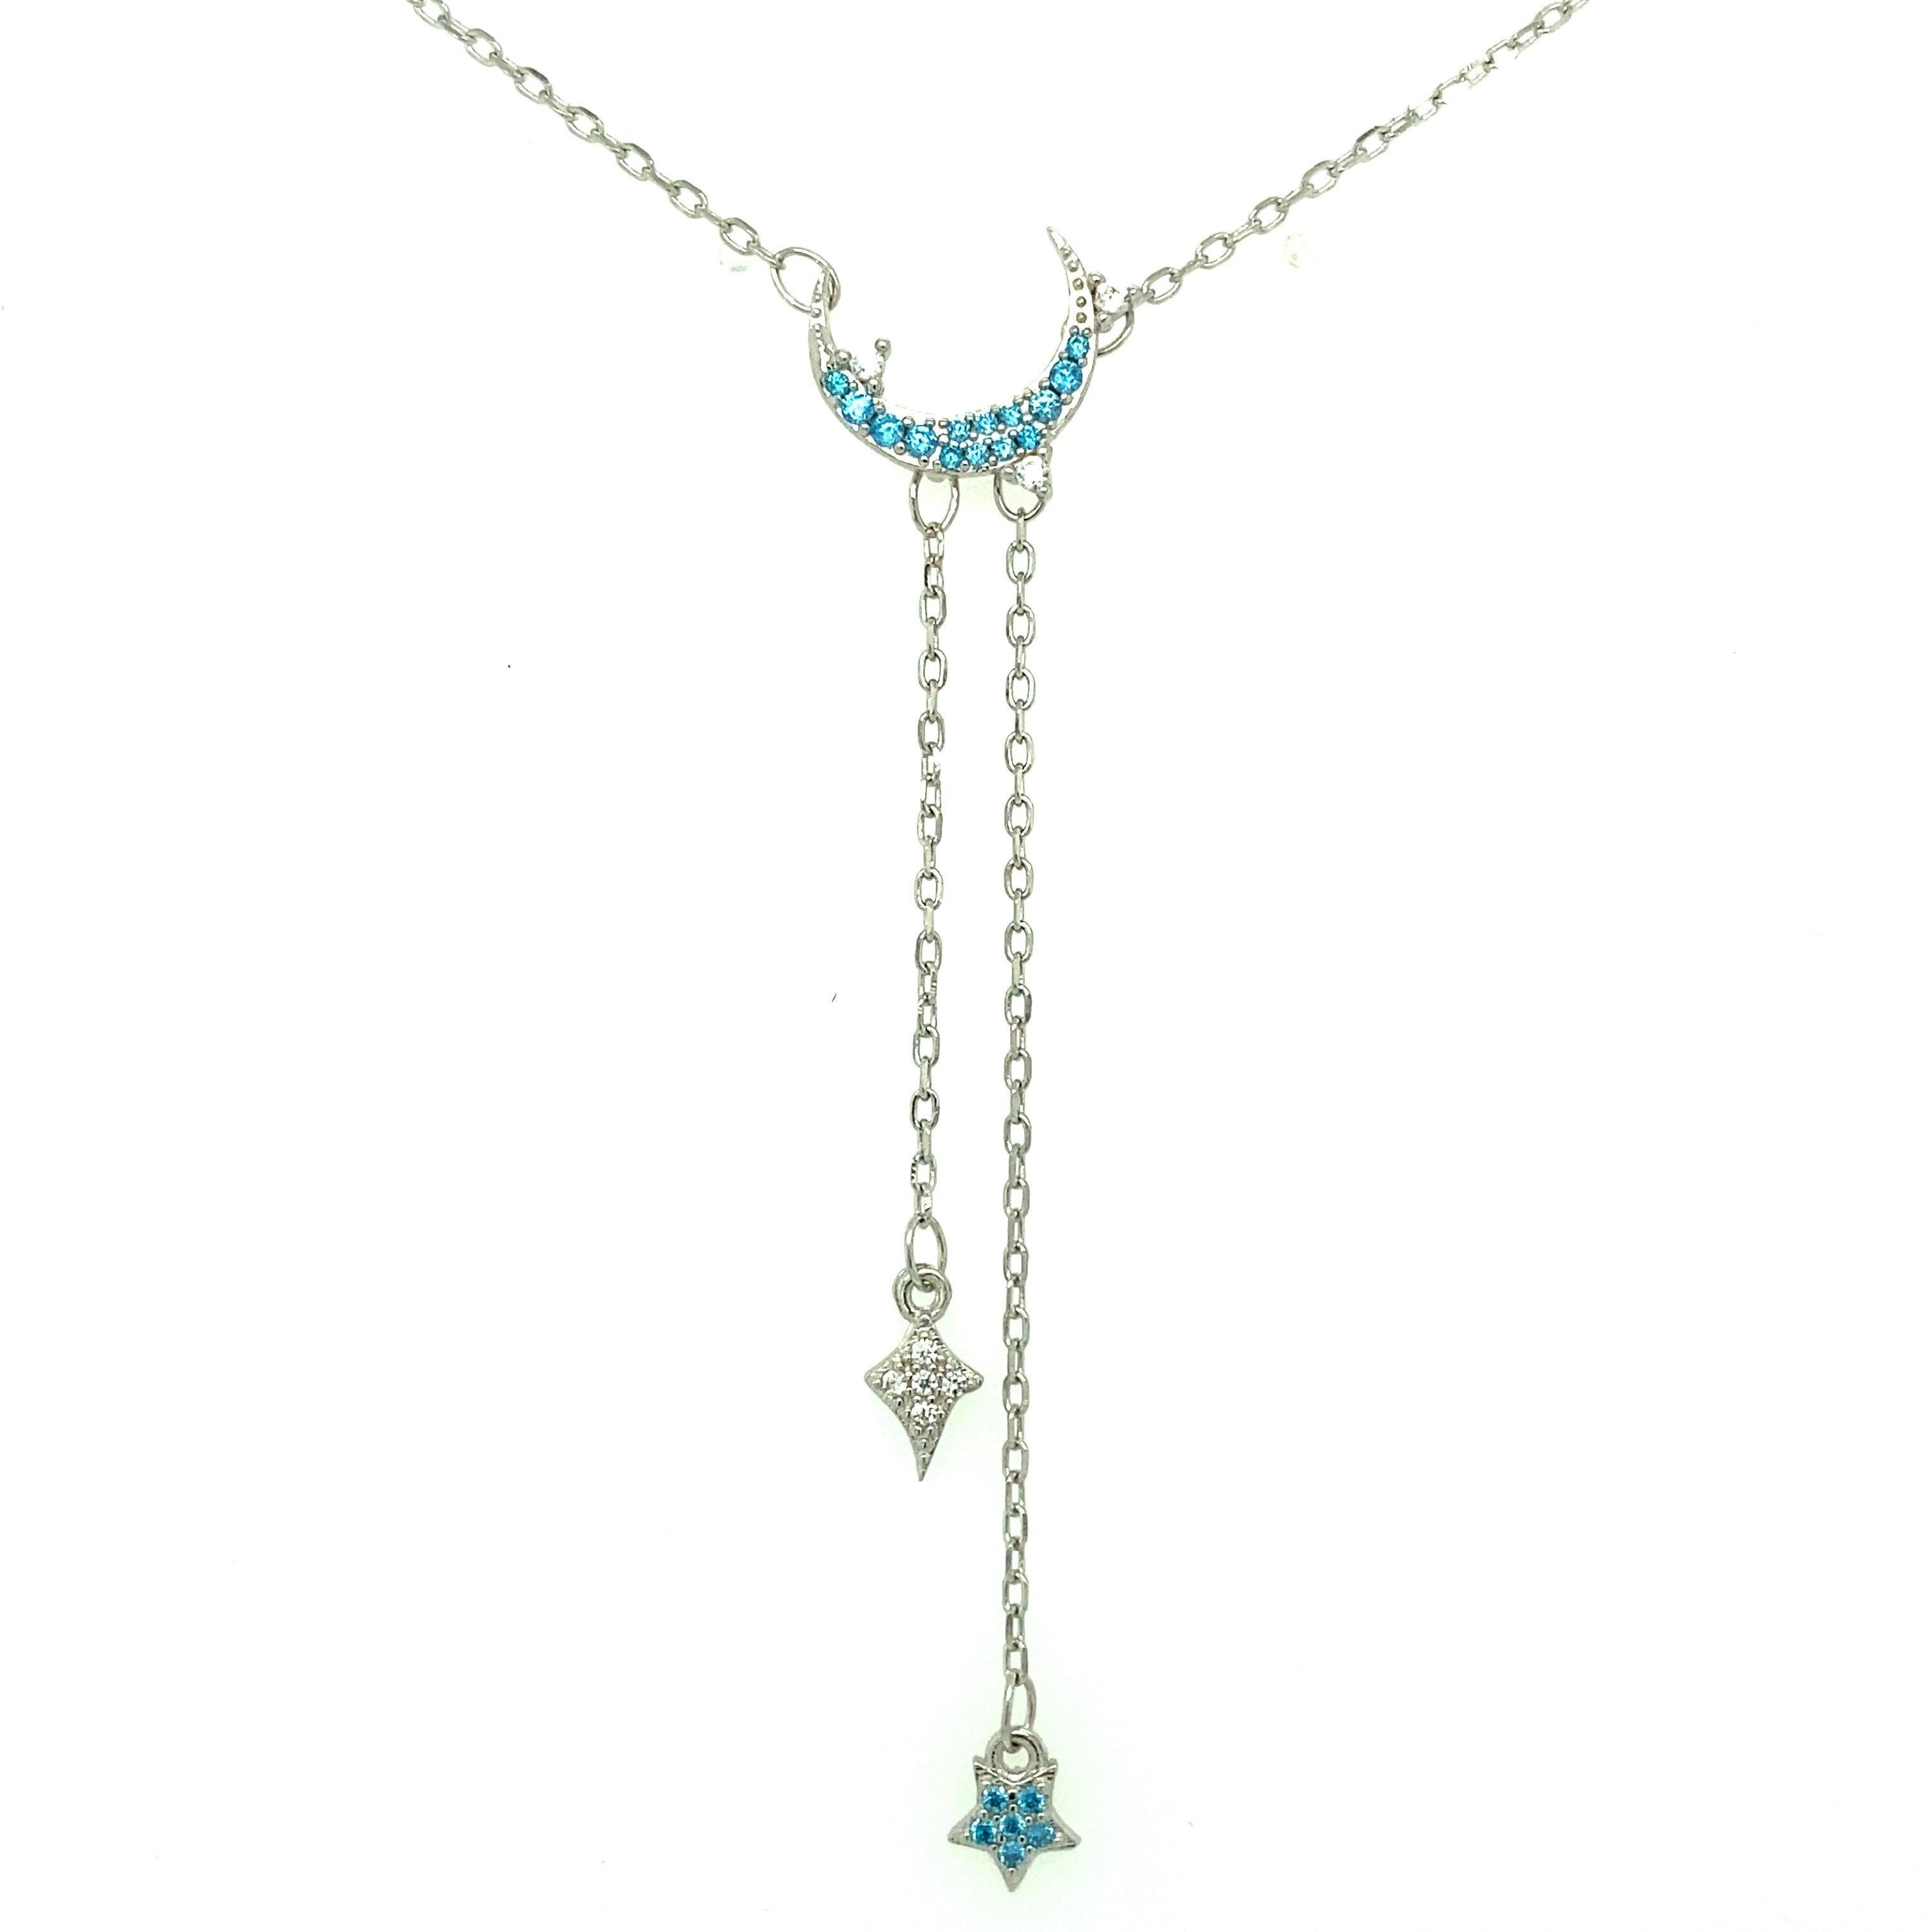 Asfour-Crystal-accessories-Necklace-n1545-s-925-Sterling-Silver